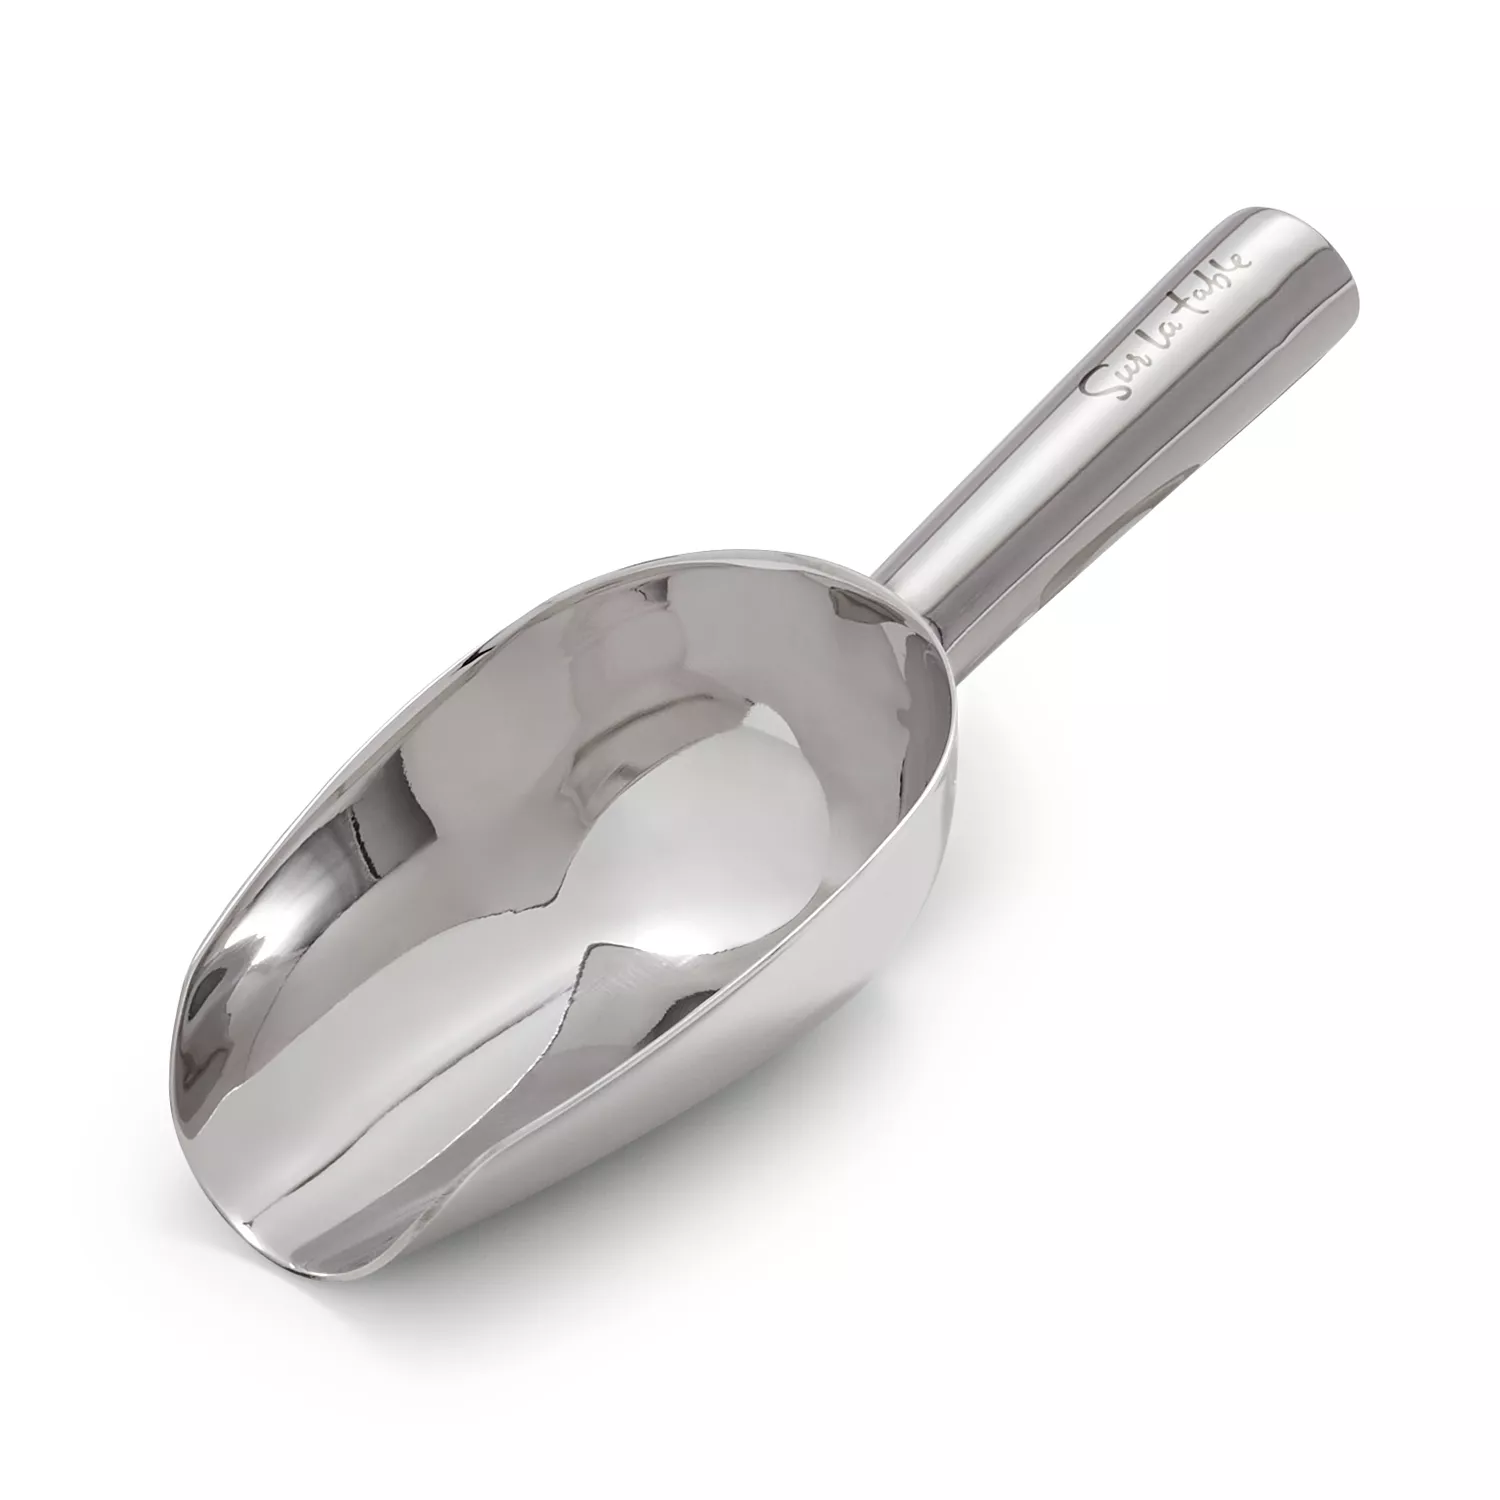 Small Cookie Scoop Gray - Made By Design 1 ct